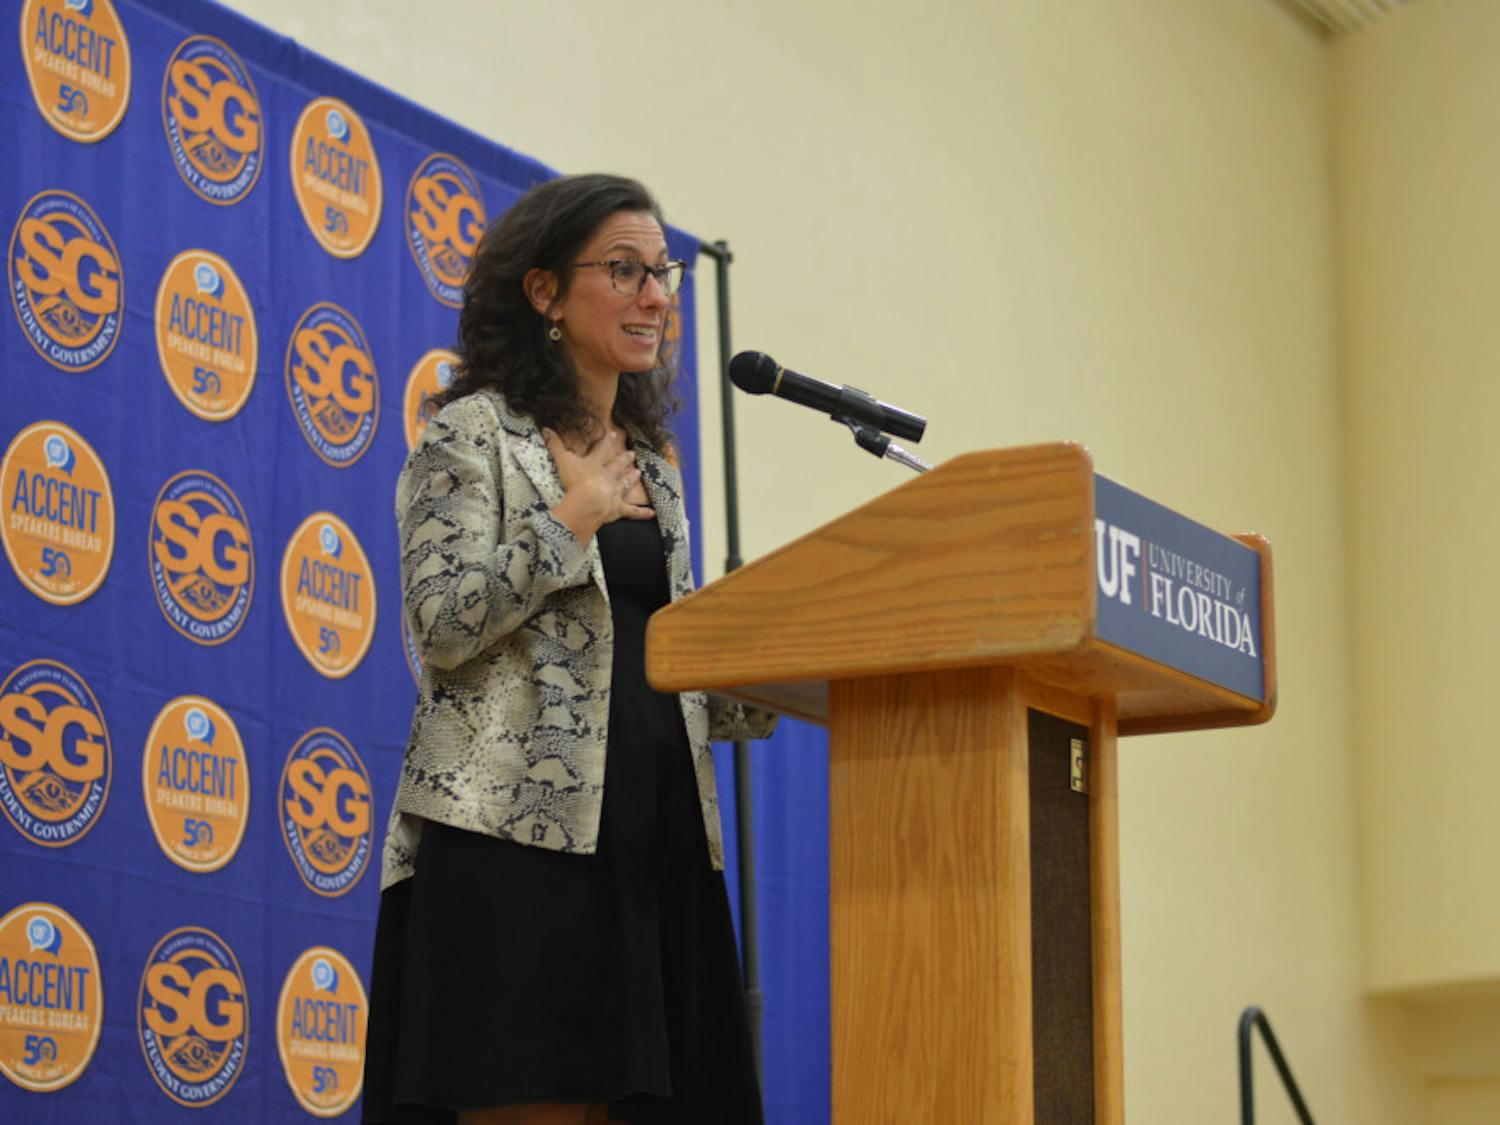 Award-winning journalist and author Jodi Kantor spoke to students Wednesday night in the Florida Gym as part of Accent Speaker Bureau's final event of the semester. The New York Times investigative reporter was recently awarded the Pulitzer Prize for her story uncovering Harvey Weinstein's sexual abuse in the entertainment industry as well as being named one of TIME Magazine's 100 most influential people of 2018.